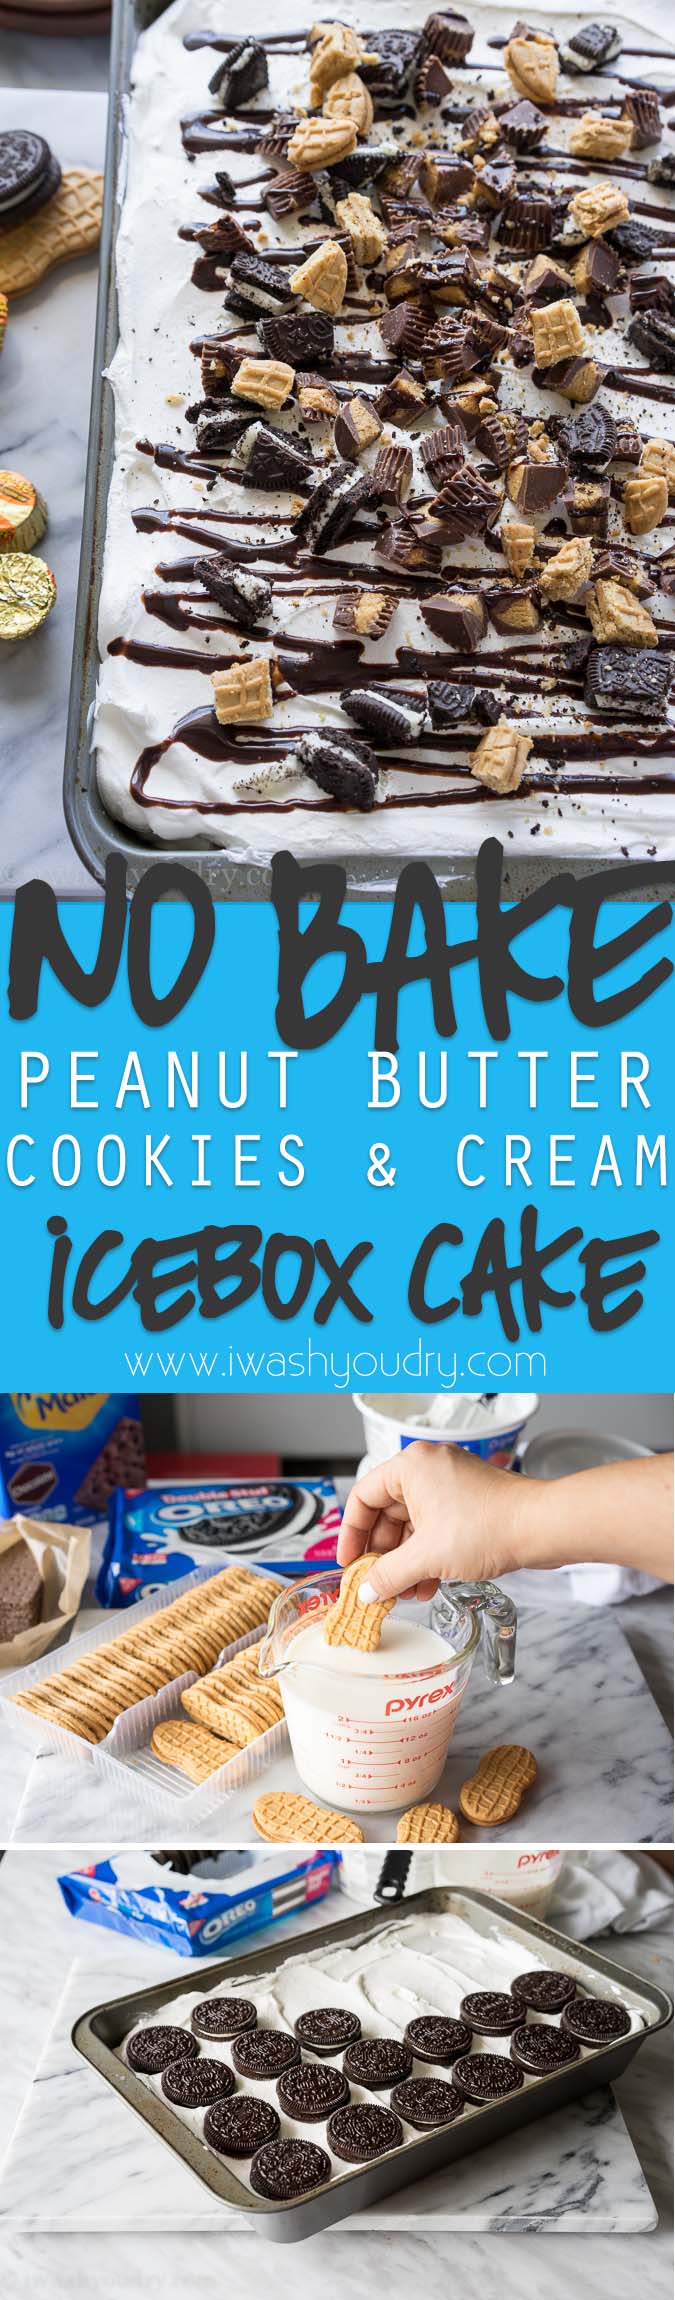 Insanely delicious - No Bake Peanut Butter Cookies and Cream Icebox Cake!!